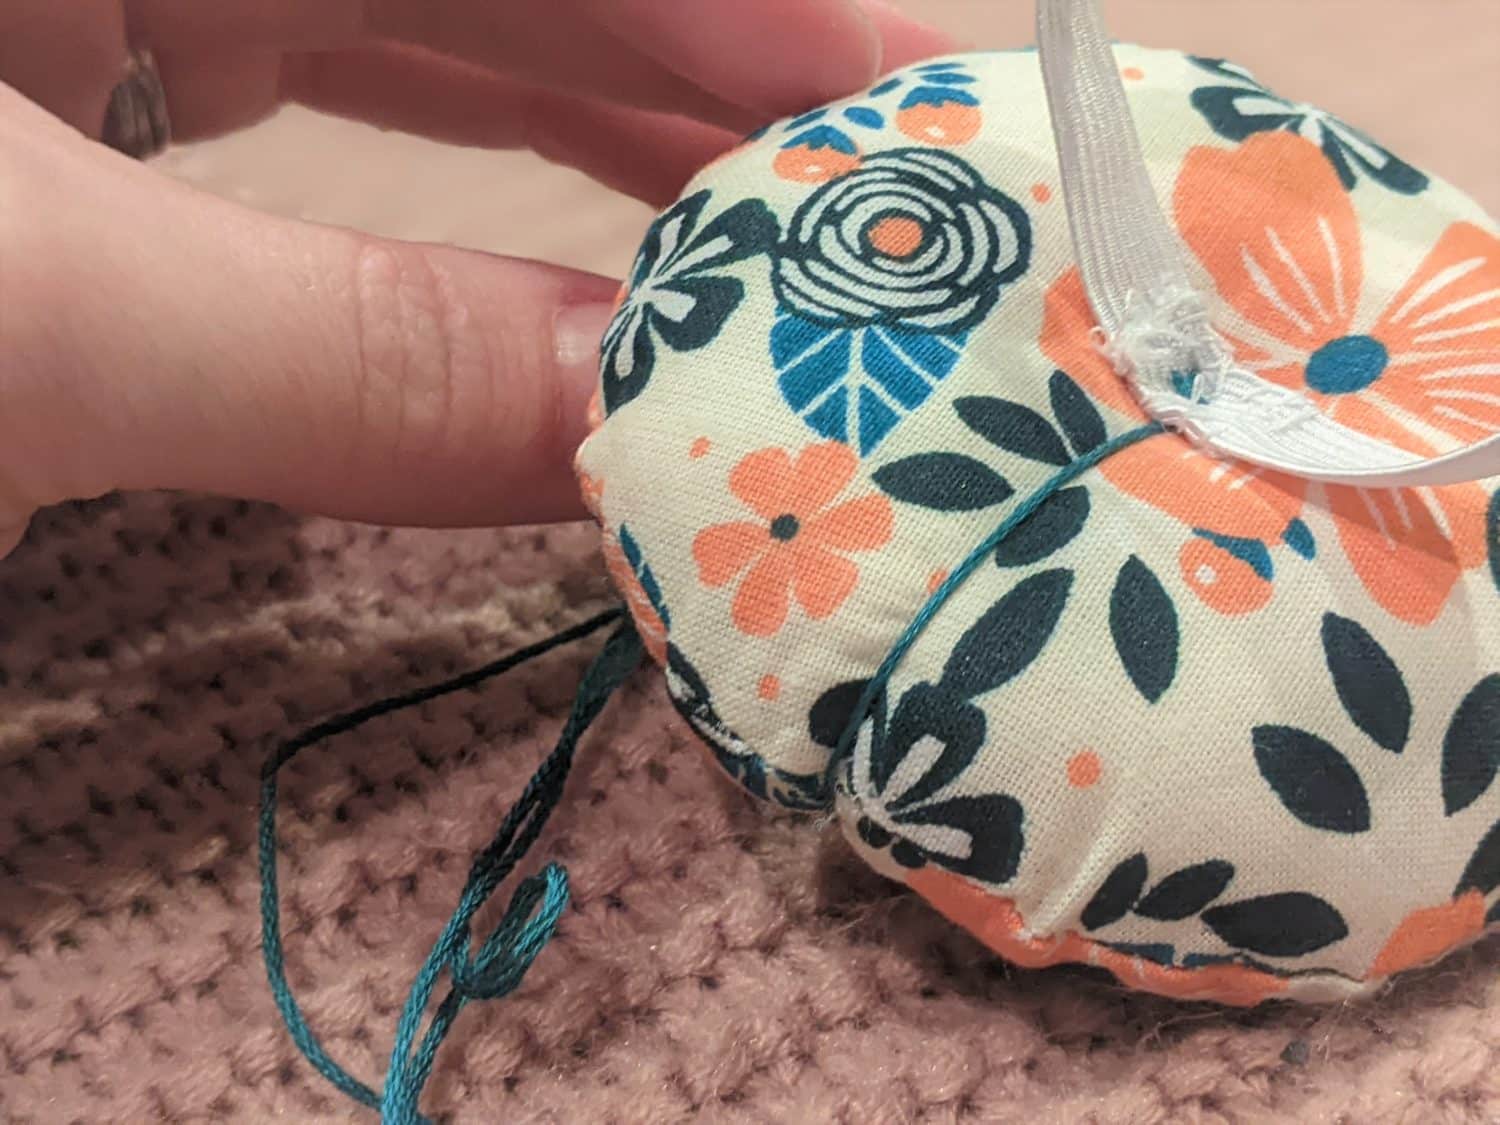 Sew a Wrist Pin Cushion - Easy Sewing For Beginners